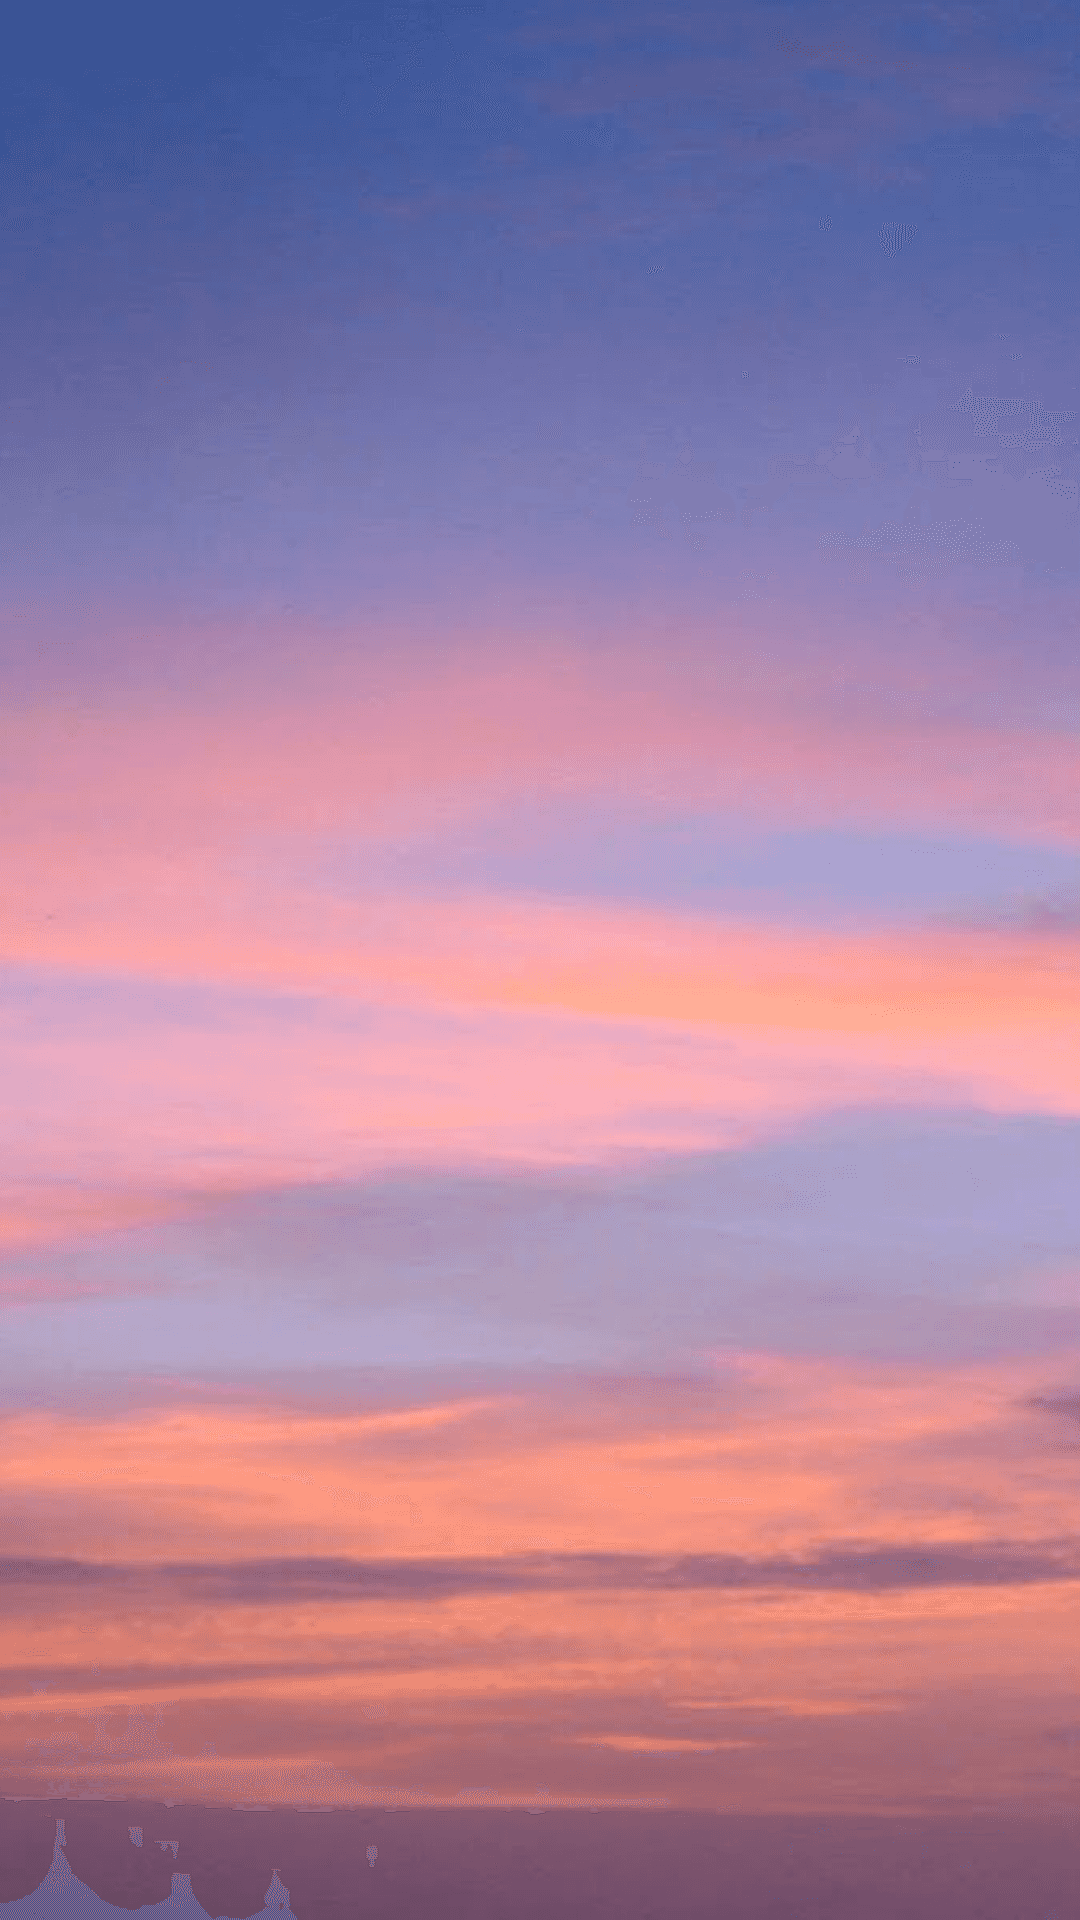 Enjoy a beautiful sunset sky, layered in pink and orange hues